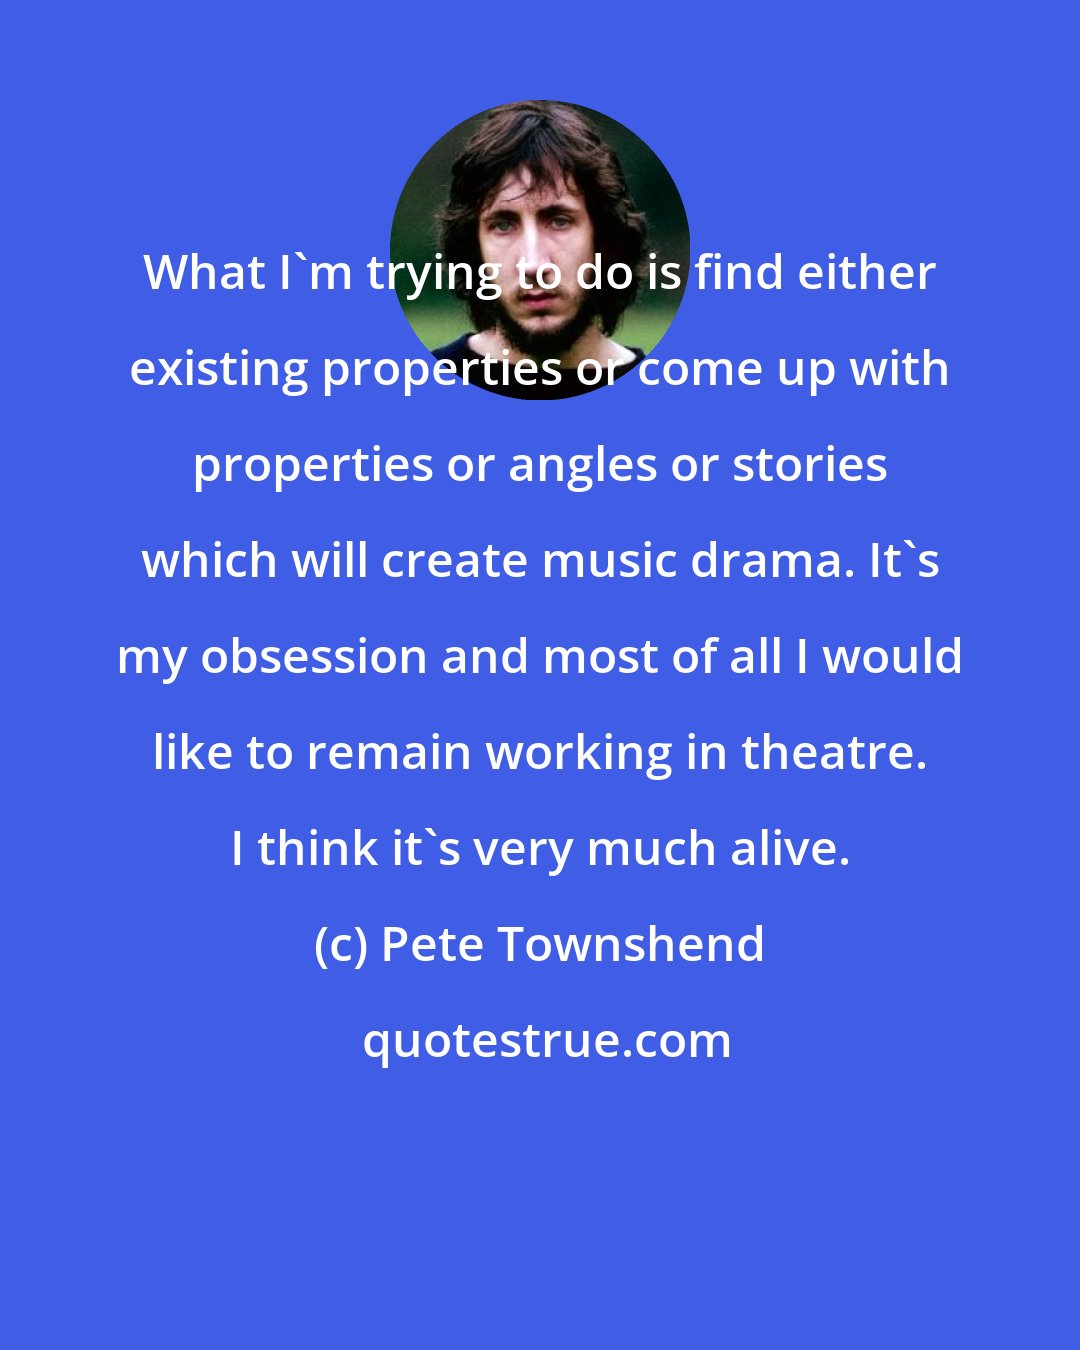 Pete Townshend: What I'm trying to do is find either existing properties or come up with properties or angles or stories which will create music drama. It's my obsession and most of all I would like to remain working in theatre. I think it's very much alive.